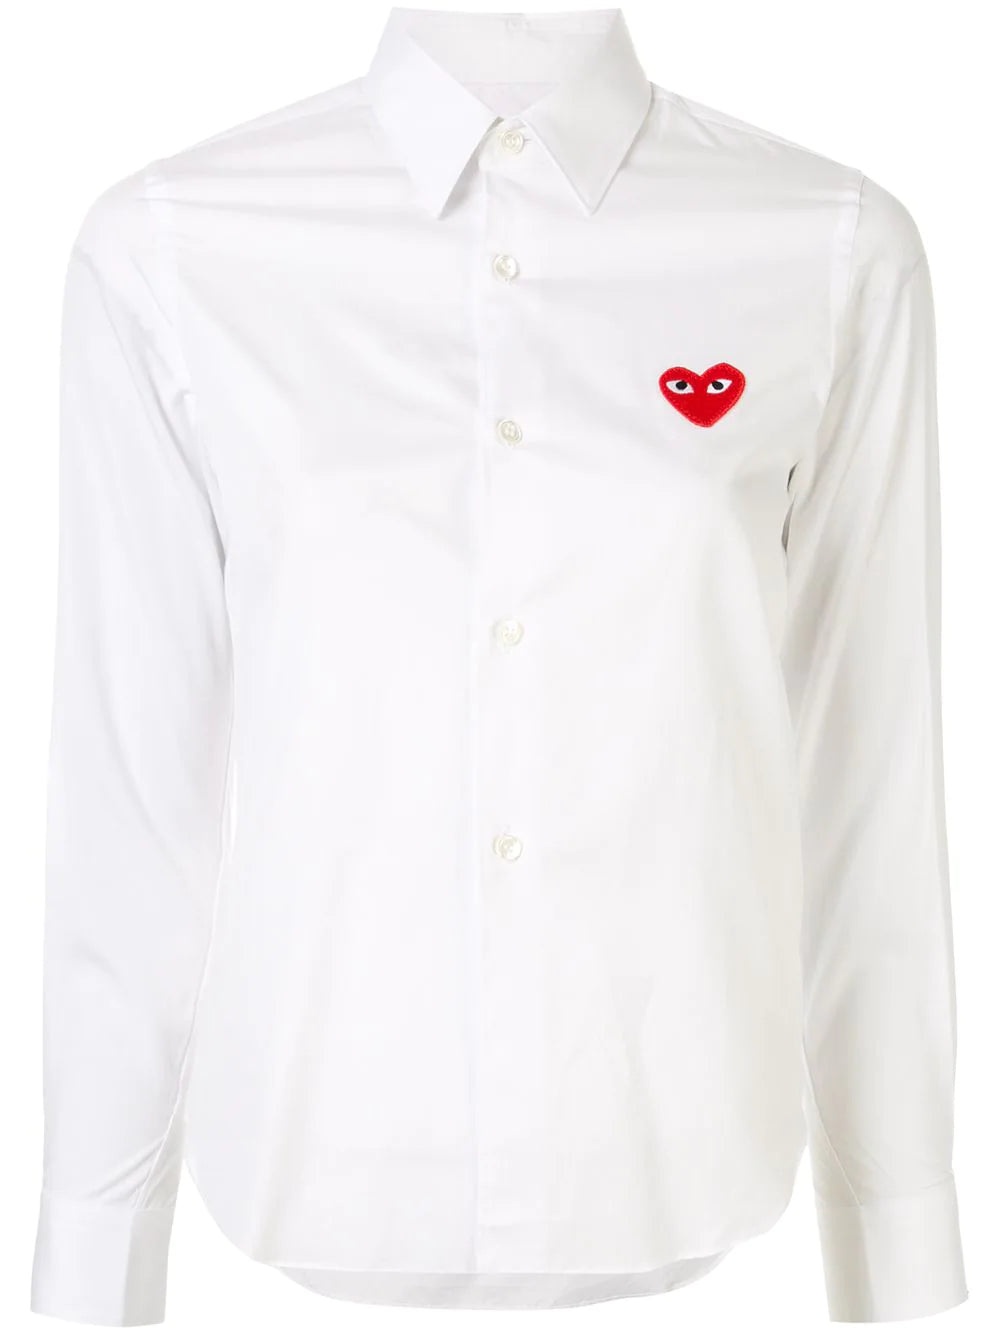 Red heart shirt in white